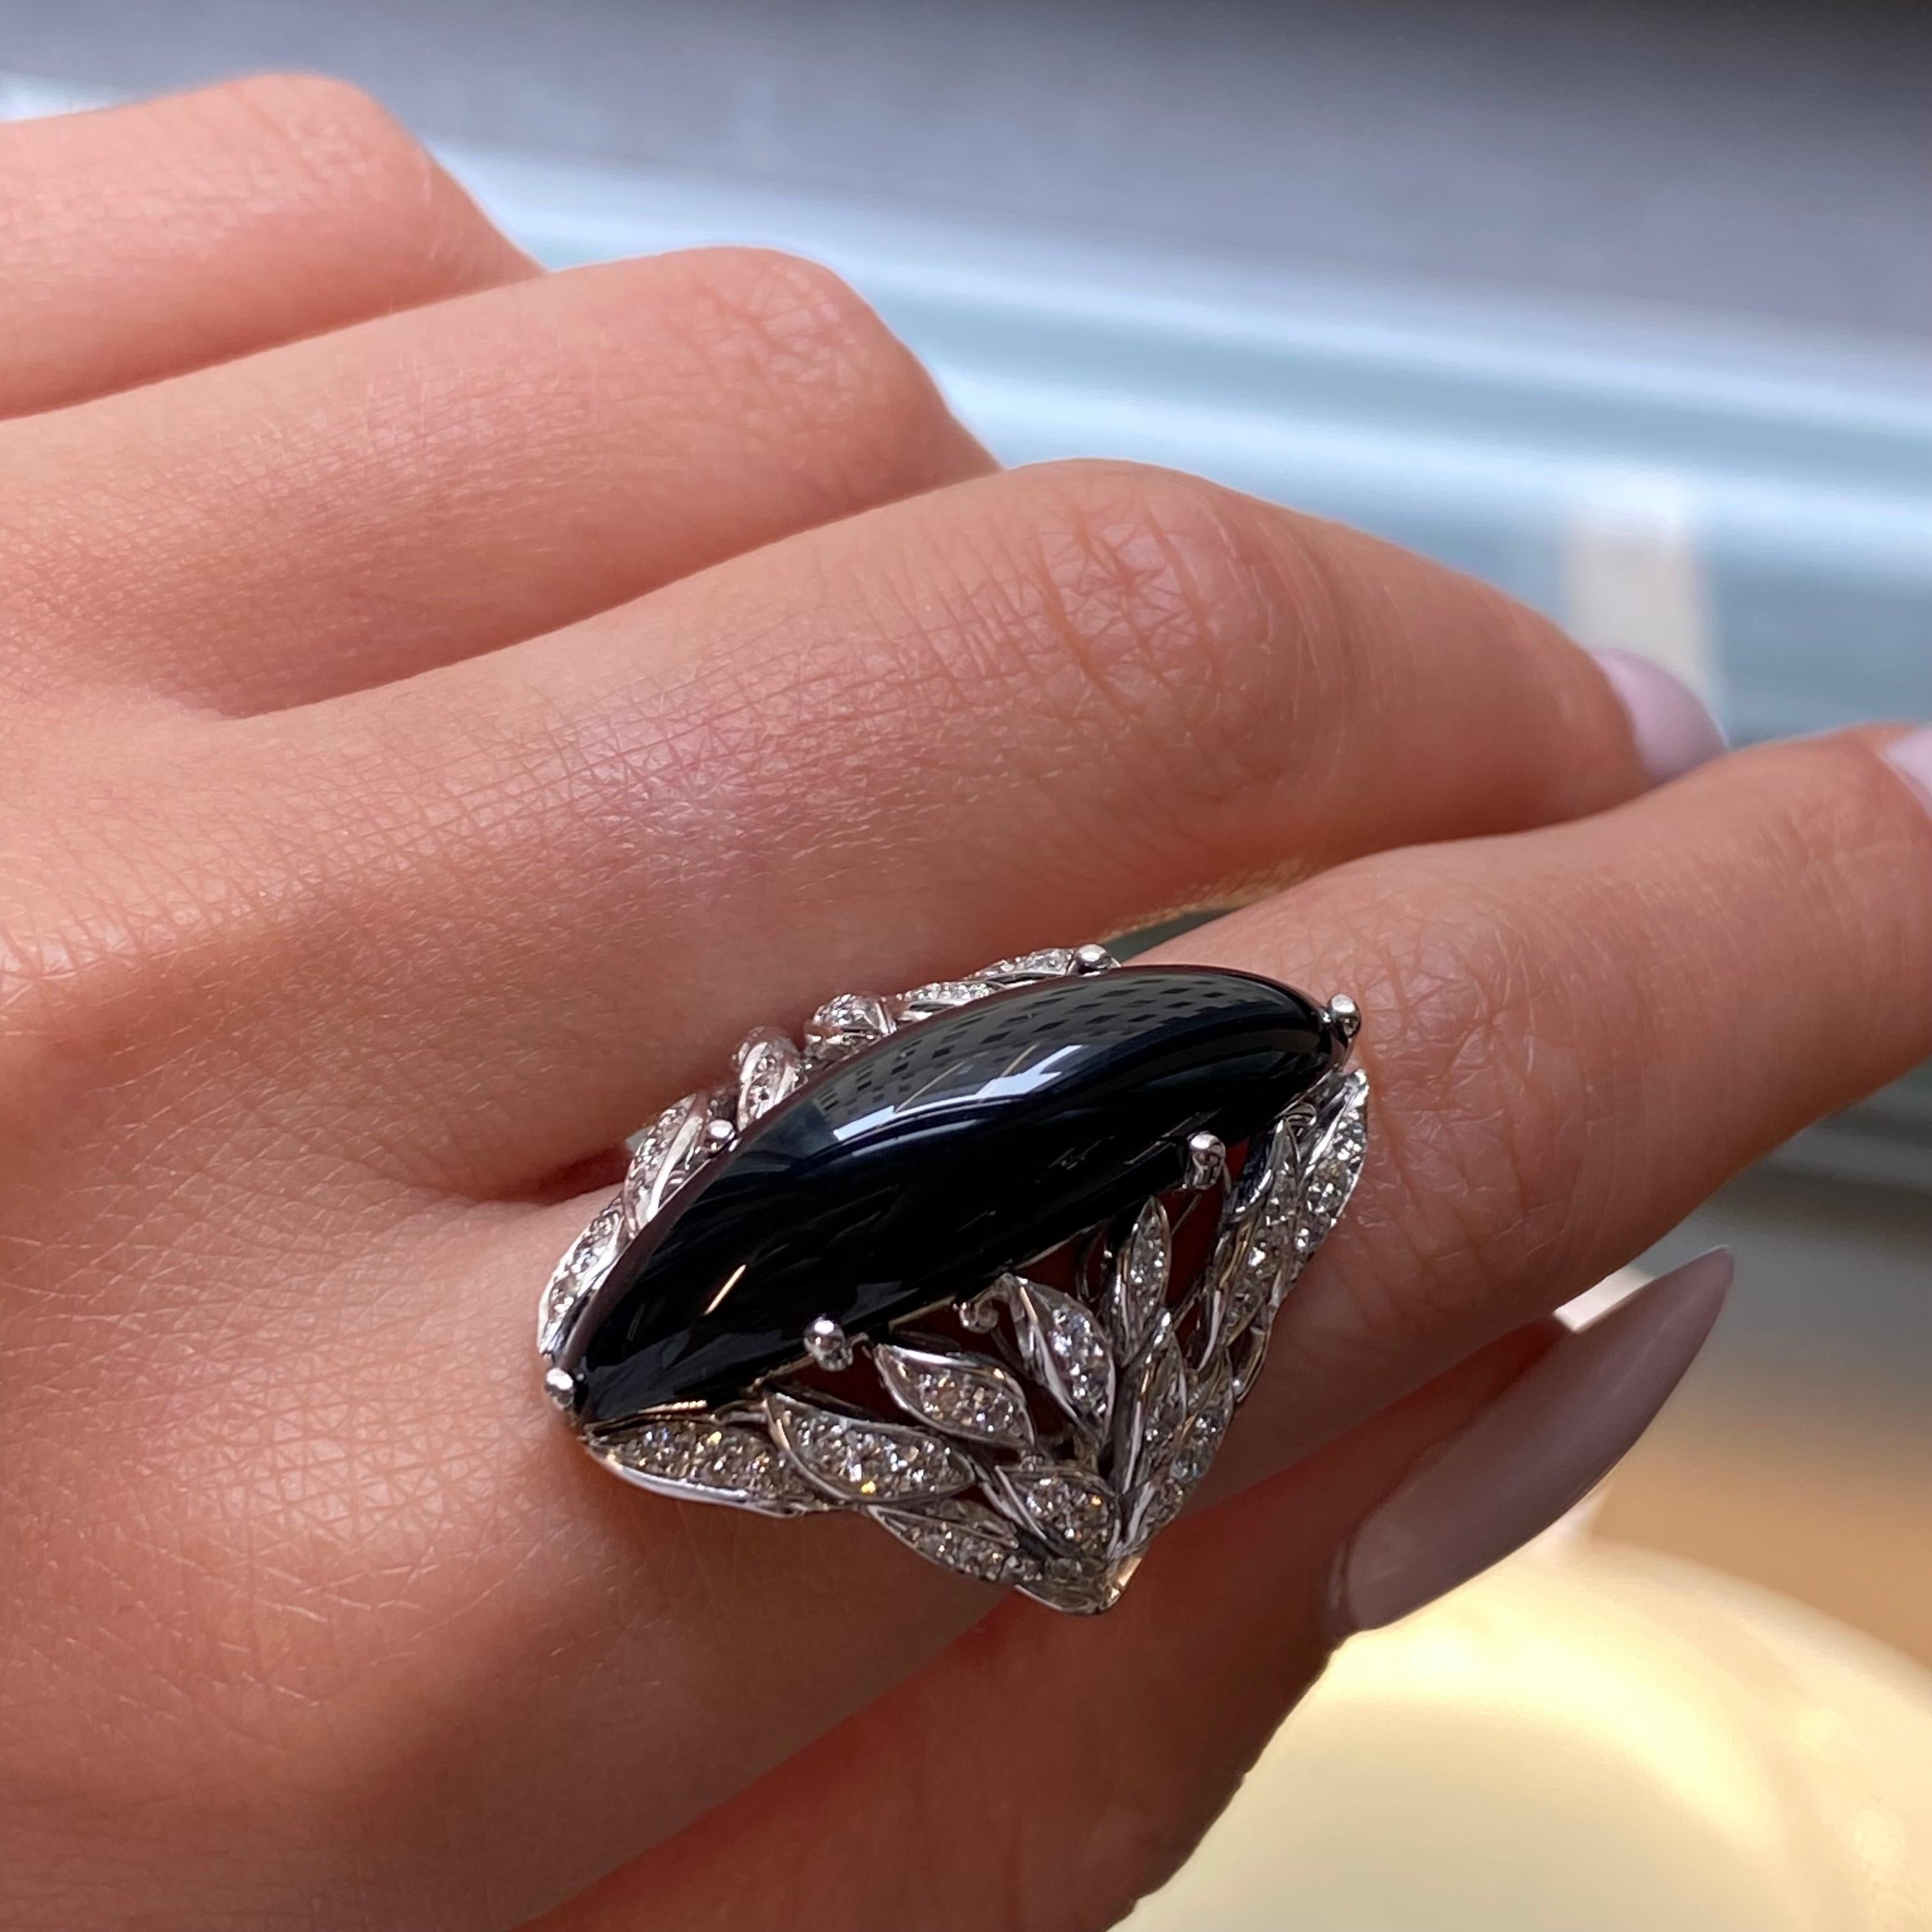 Round Cut Luca Carati Black Onyx Diamond Cocktail Ring 18K White Gold 0.79Cttw Size 6.5 For Sale